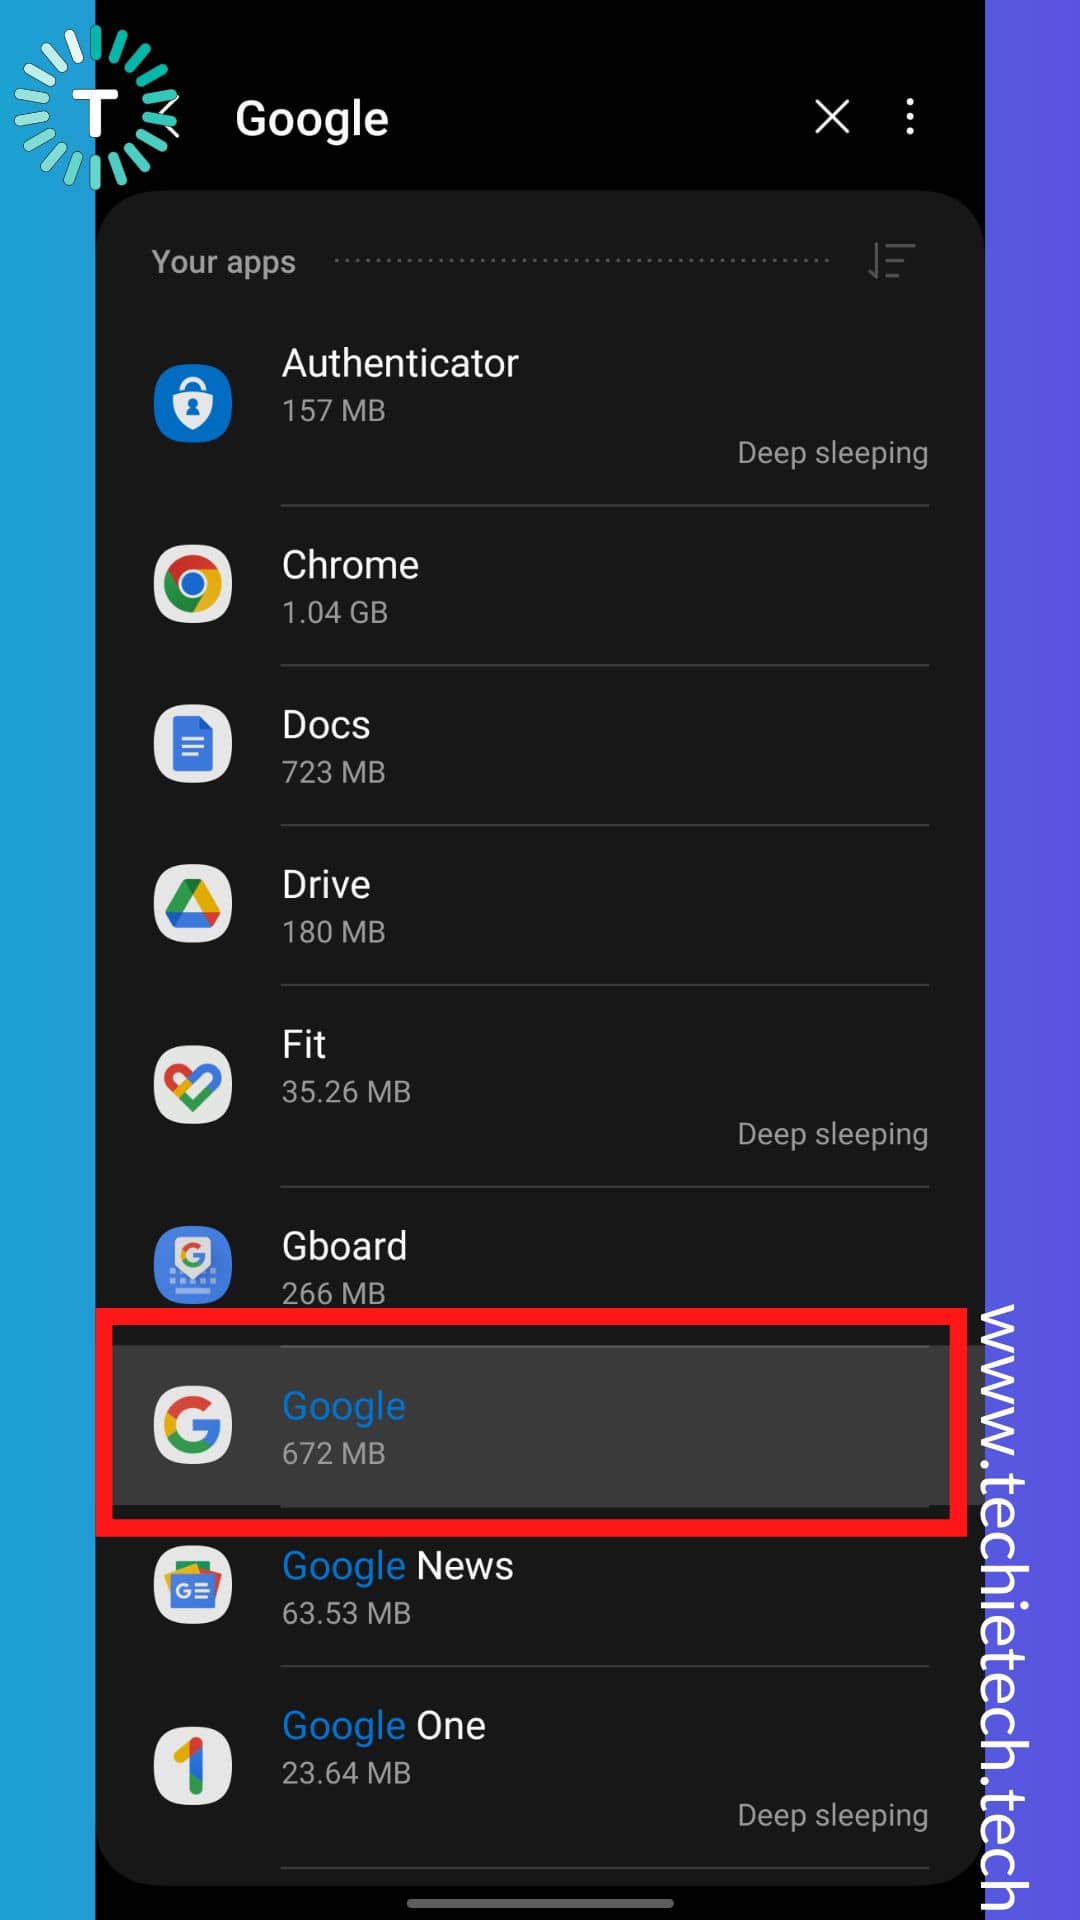 Search for the Google app and tap on it